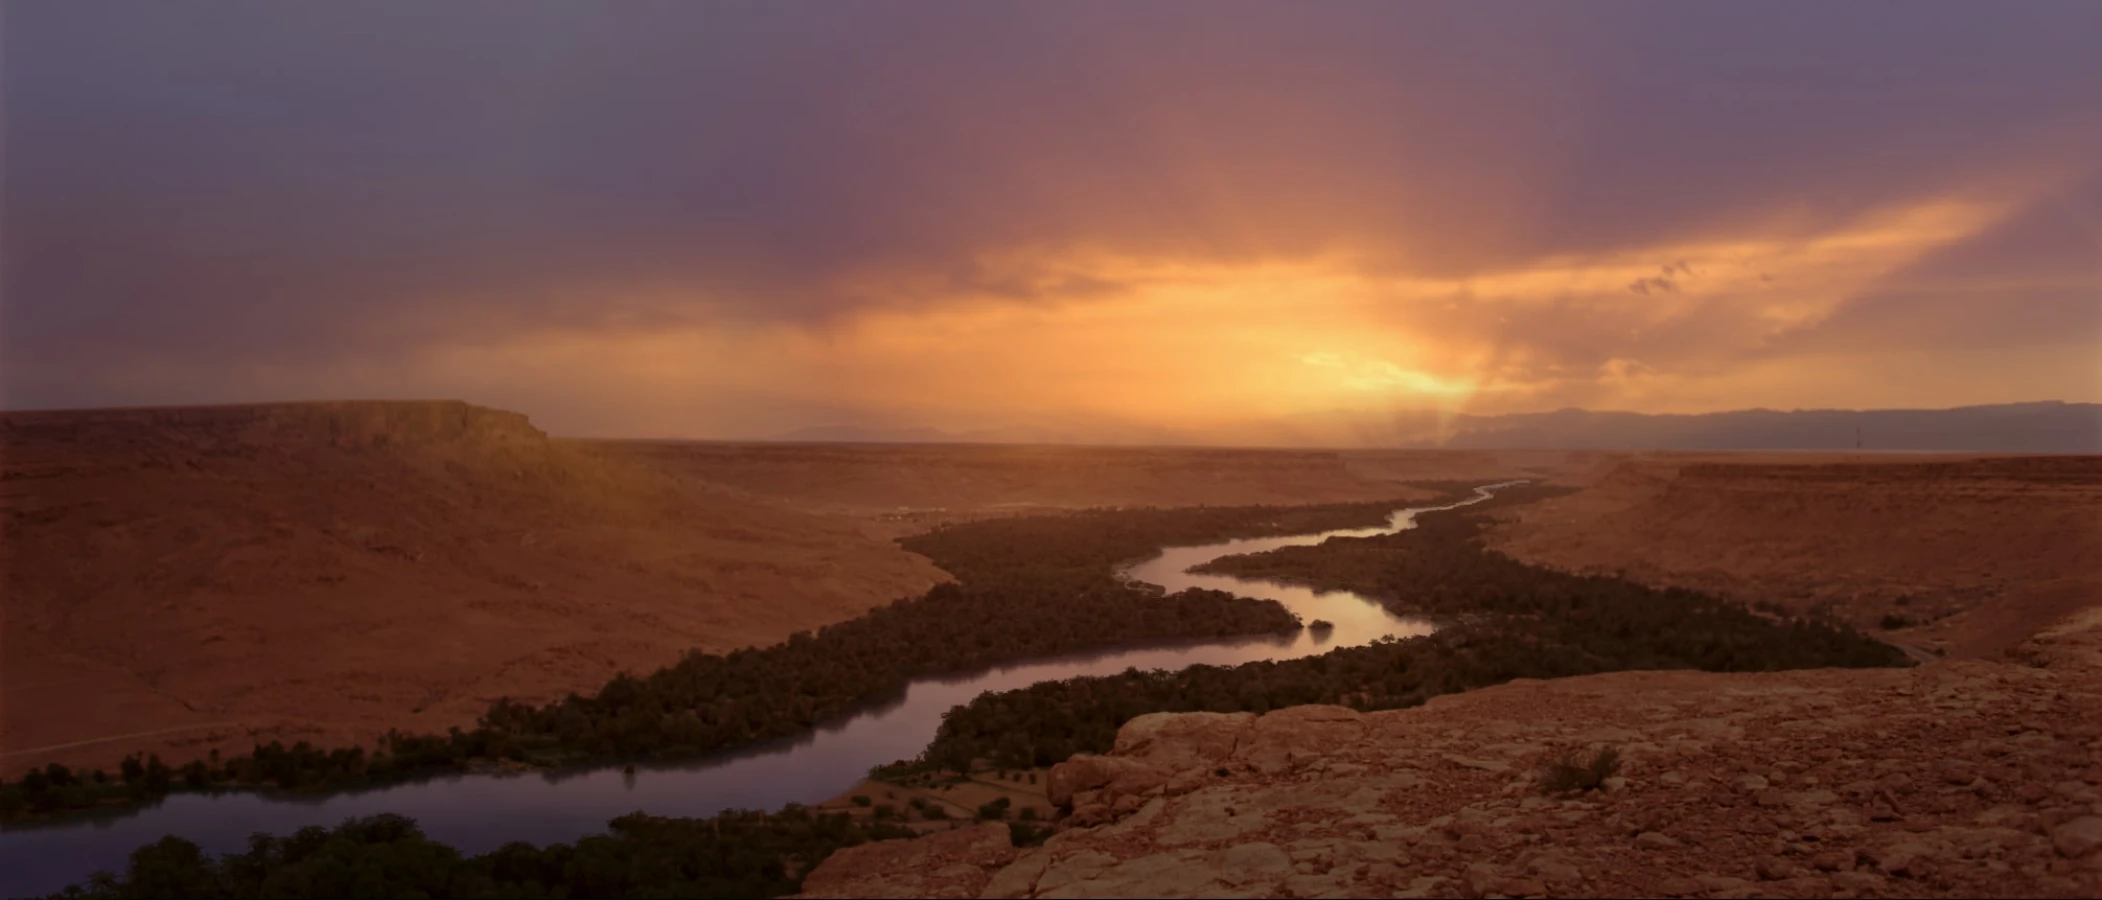  Mathieu Raynault's work river over arid mountains with sunset Raynault vfx 